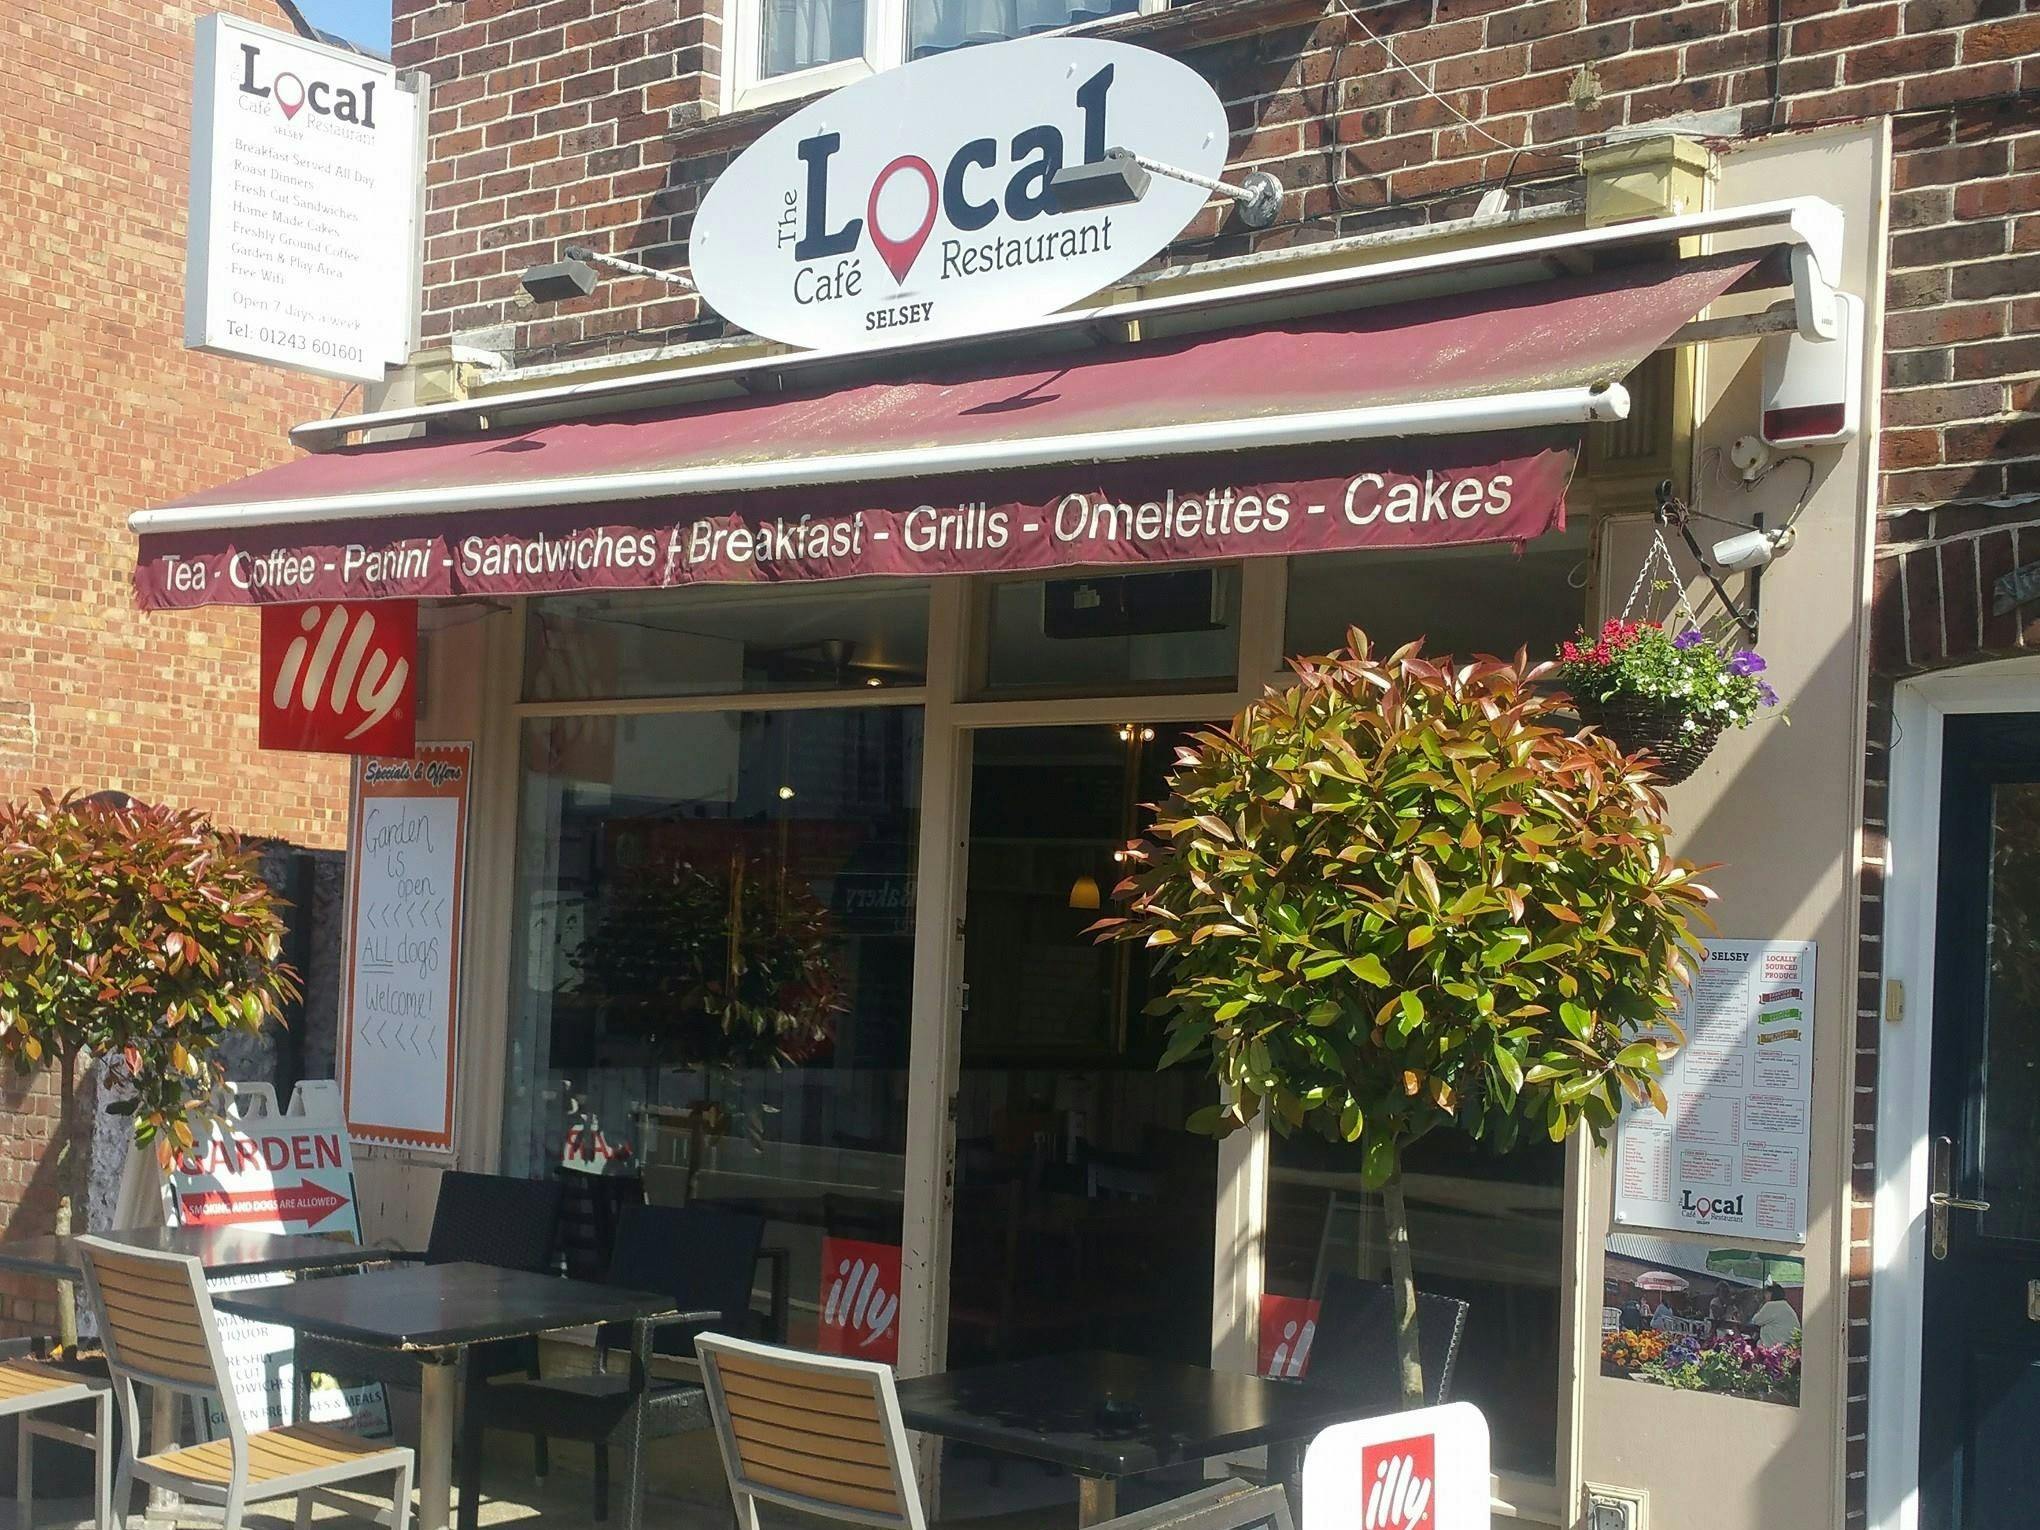 The Local Cafe